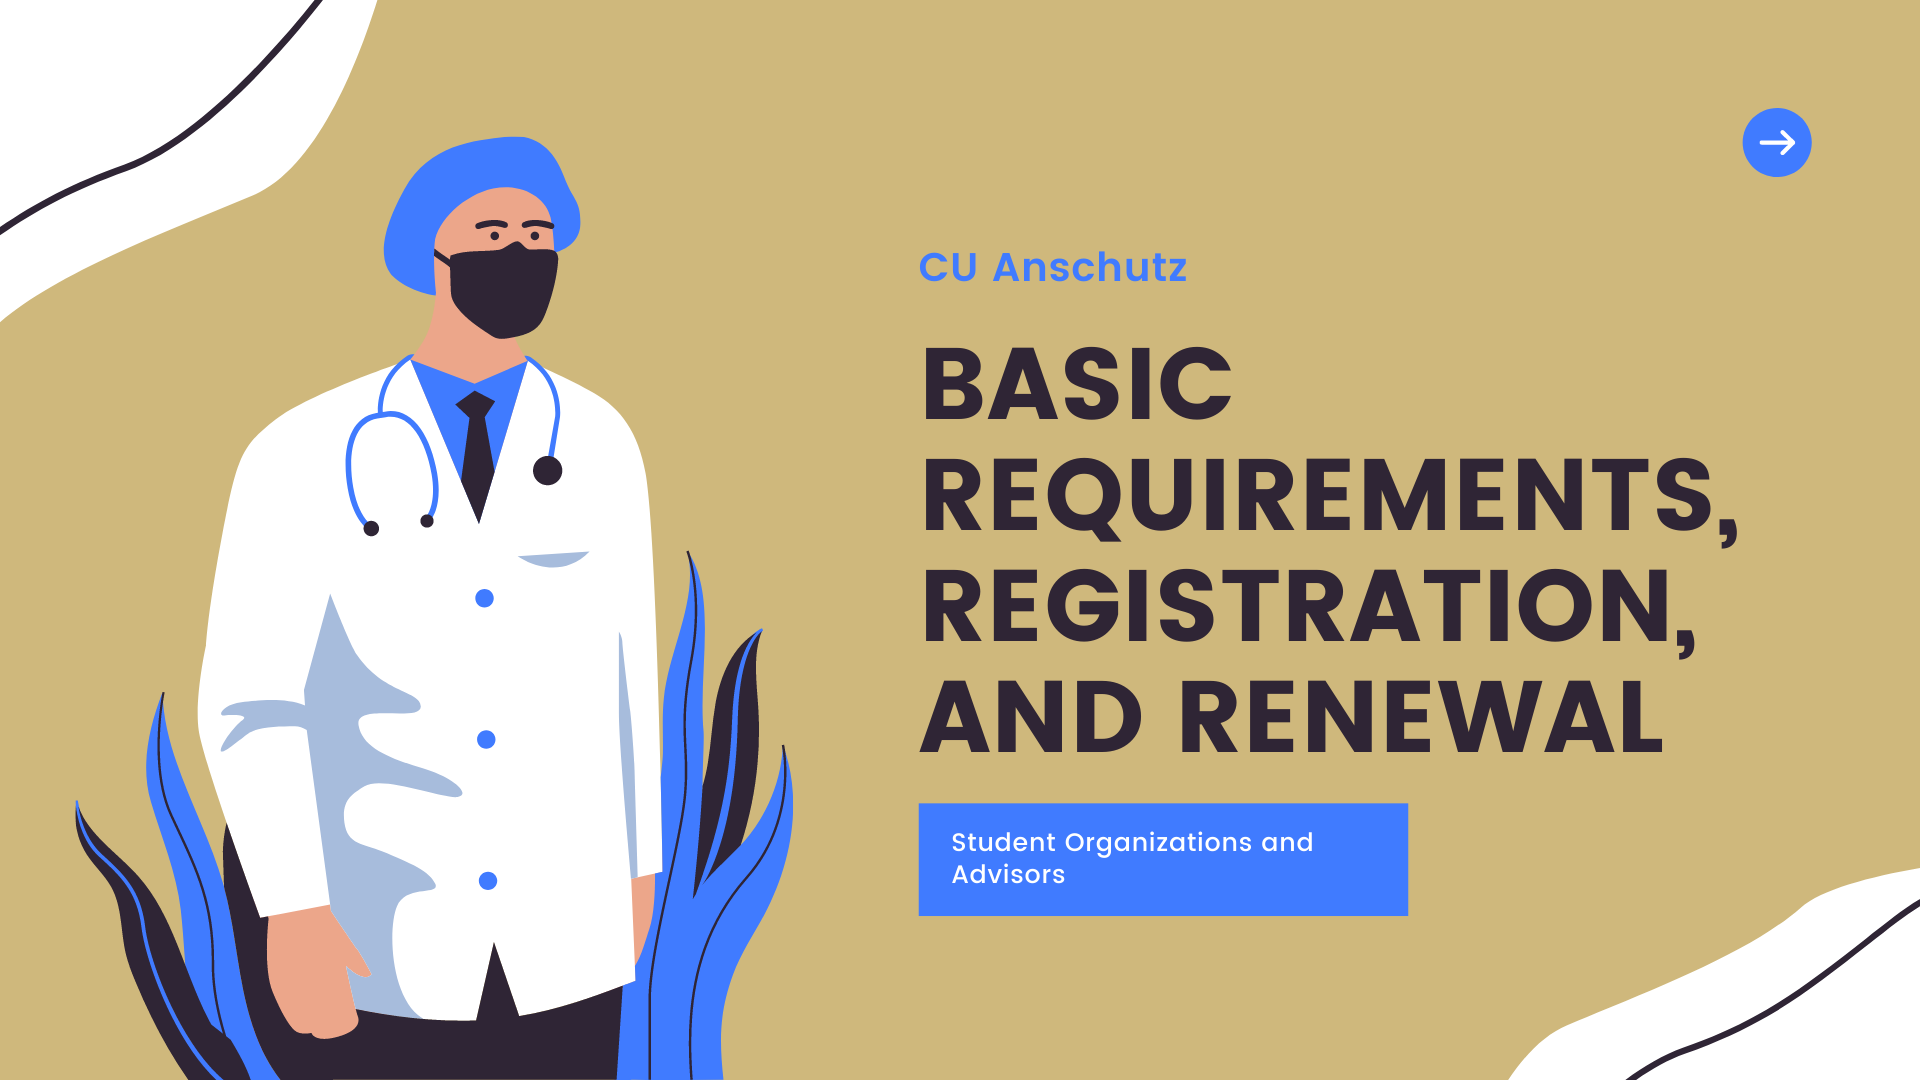 Basic Requirements, Registration, and Renewal